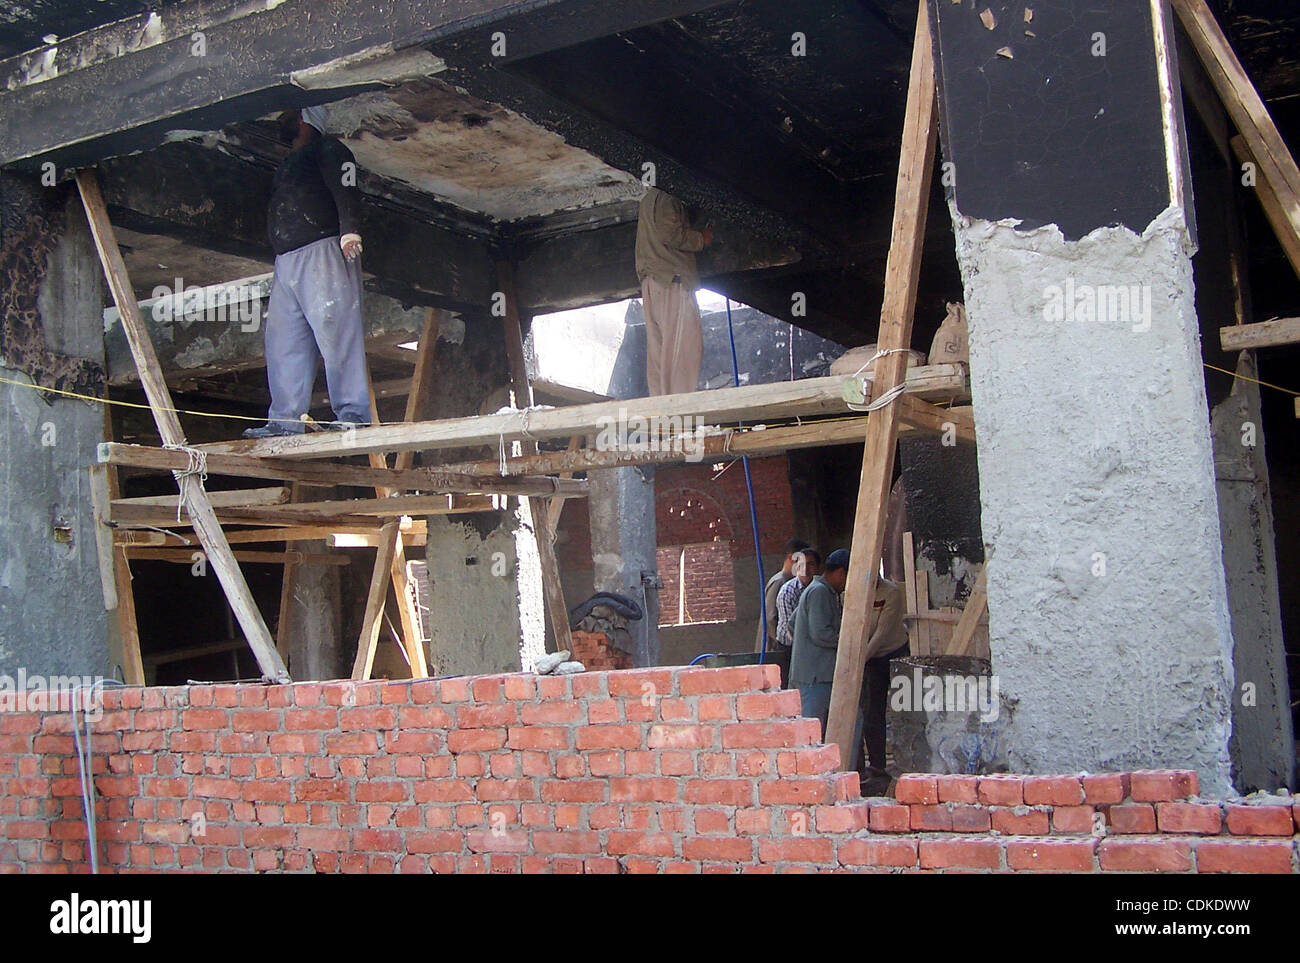 Egyptian workers take part in the rebuilding of a church in the village of Soul, south of Cairo, Egypt, Thuresday, March 17, 2011. The Egyptian army started the rebuilding of a church in Soul that was torched by a Muslim mob amid escalating tensions over a love affair between a Muslim woman and a Ch Stock Photo